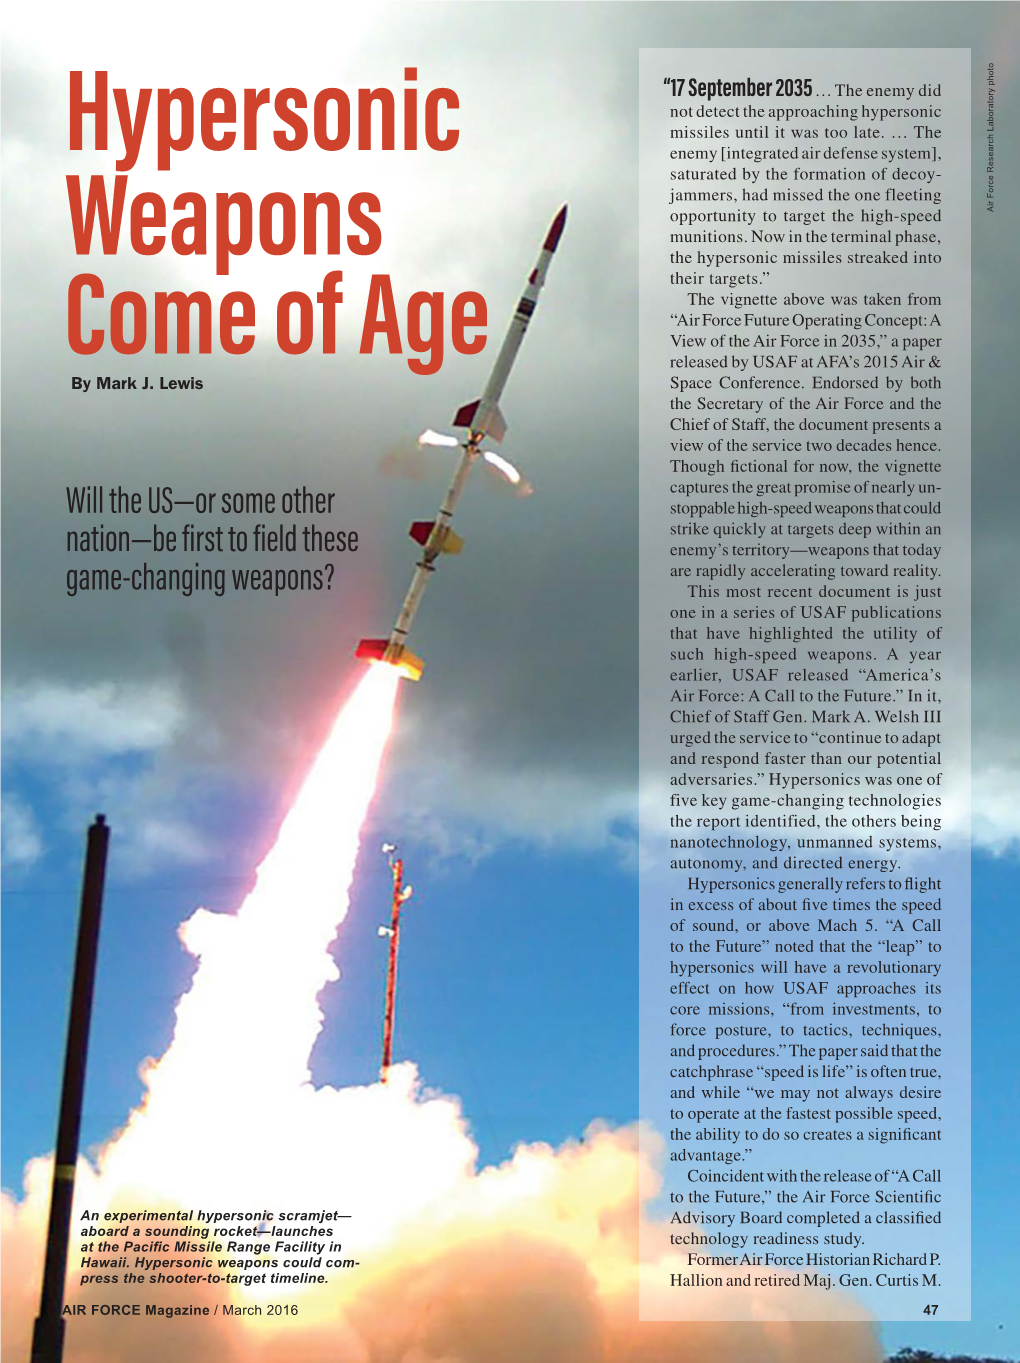 Will the US—Or Some Other Nation—Be First to Field These Game-Changing Weapons?